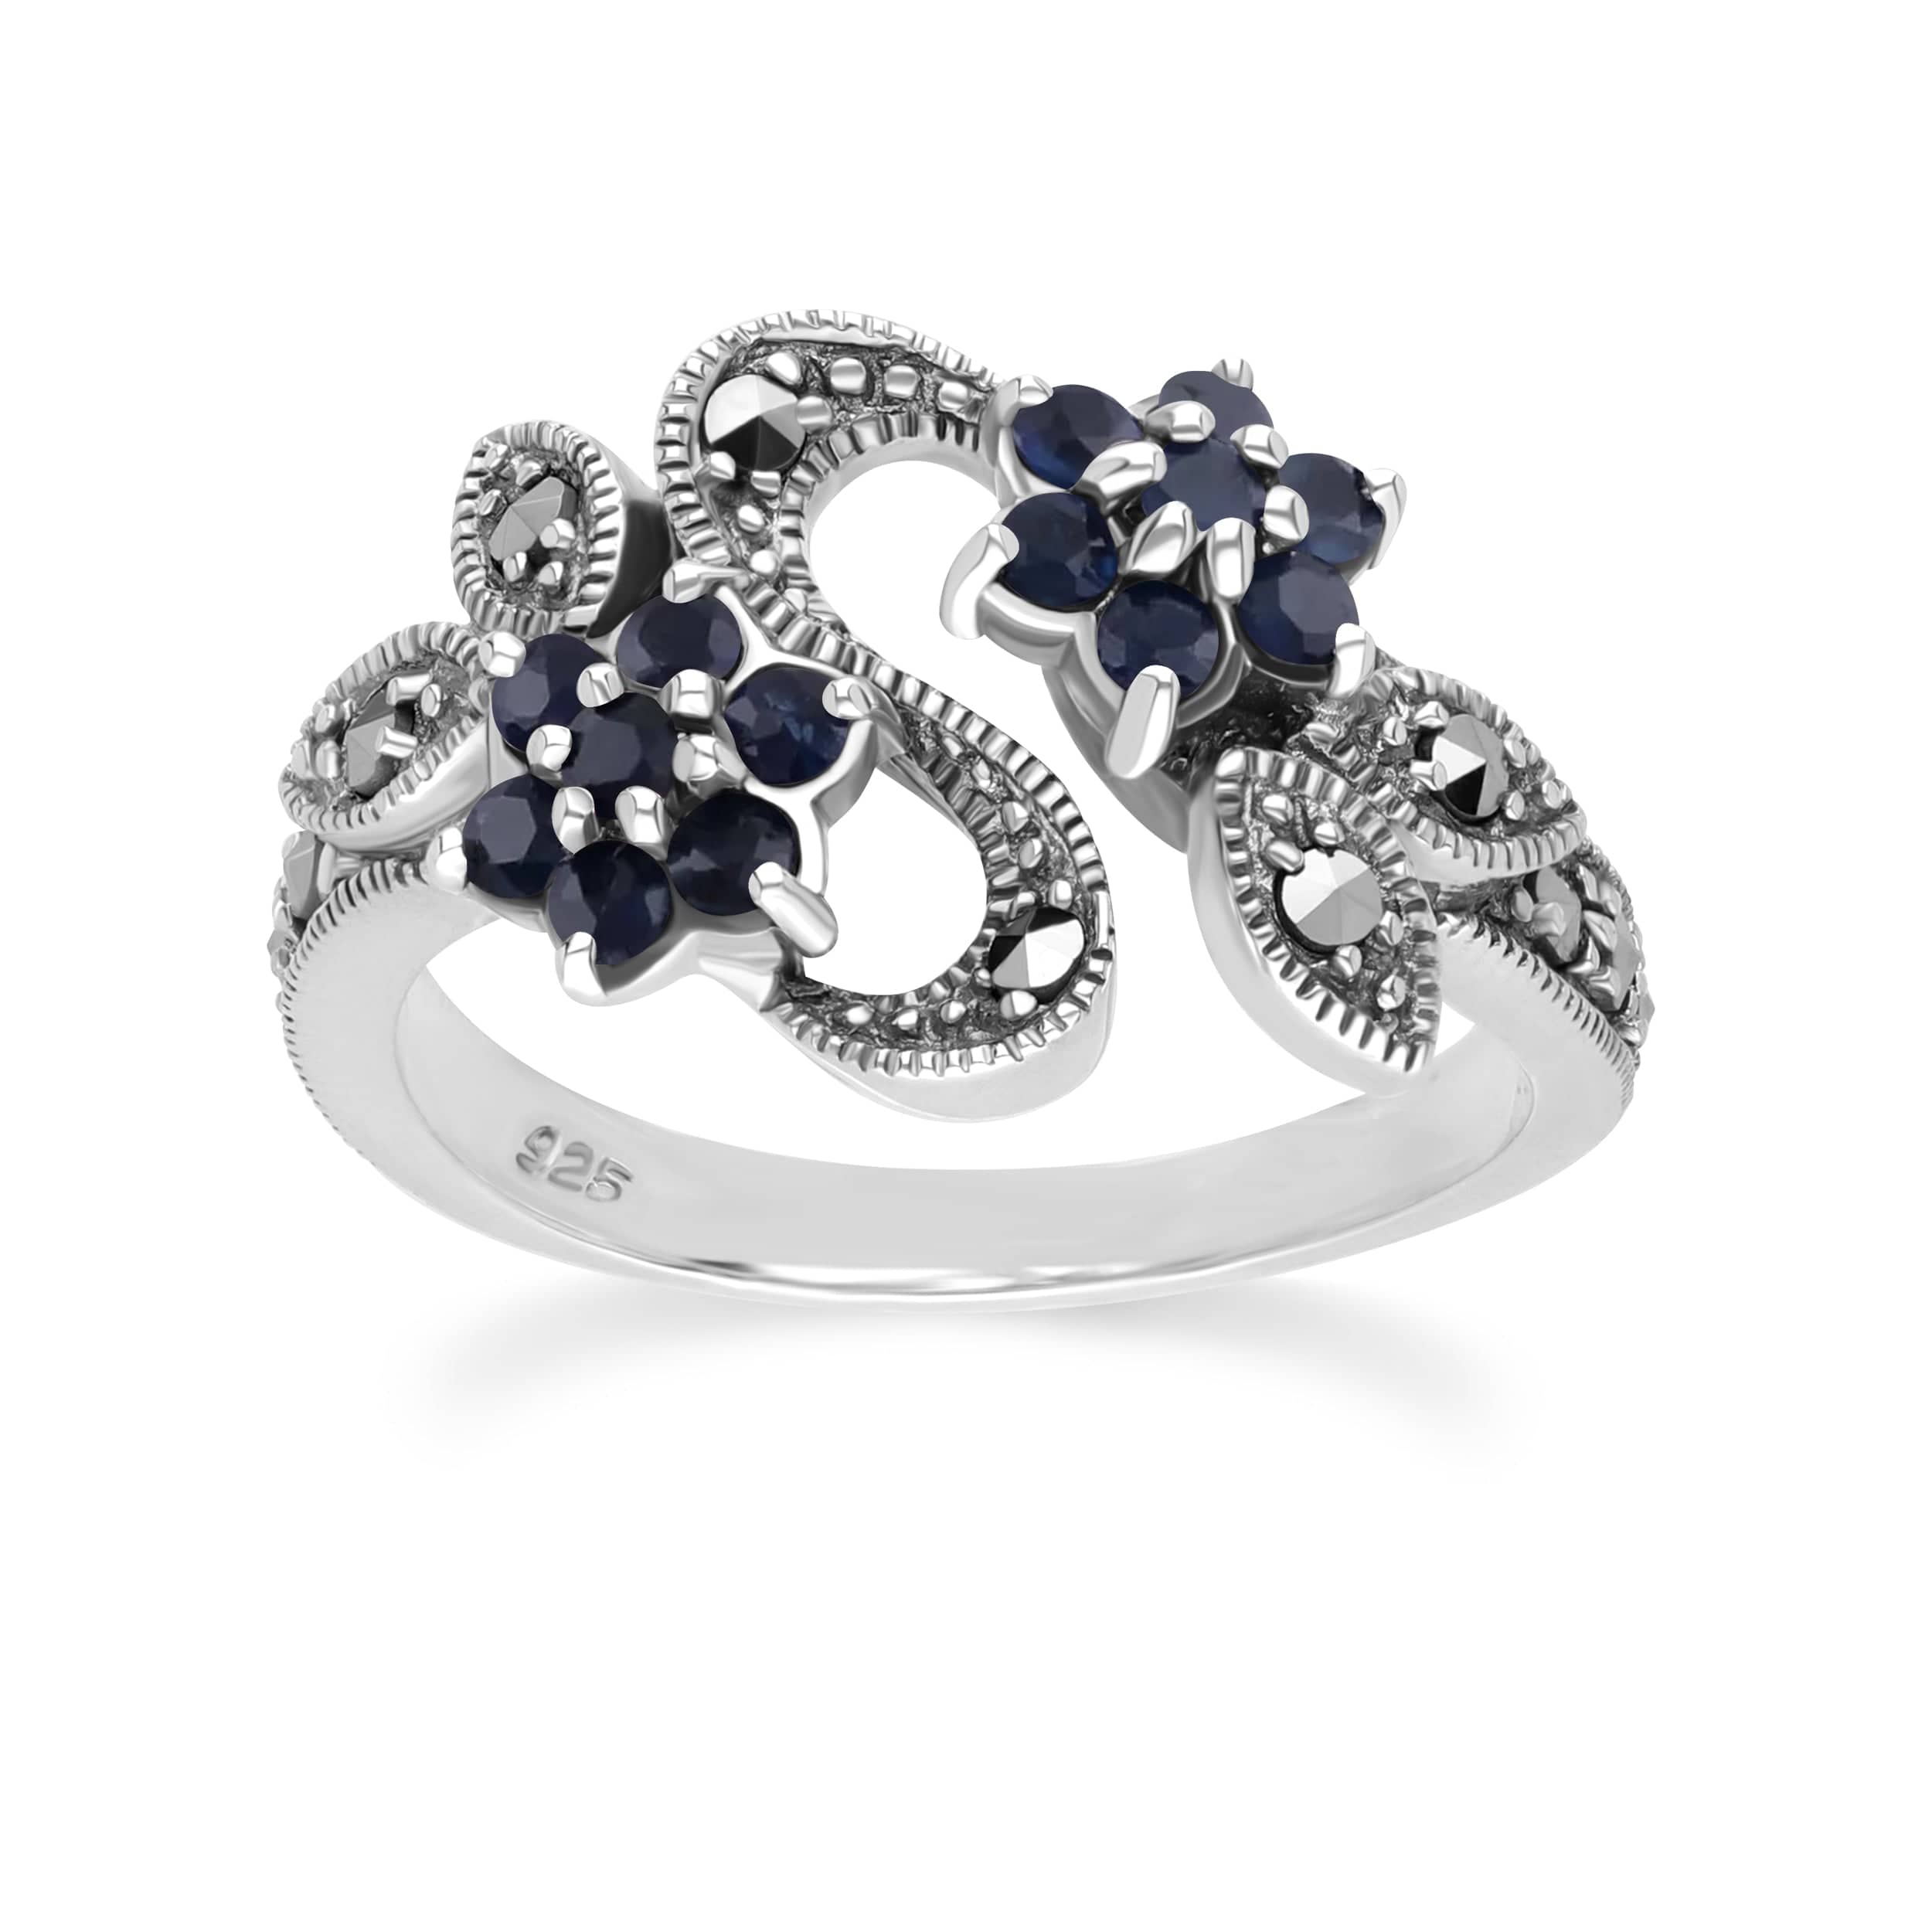 Art Nouveau Style Round Sapphire & Marcasite Flower Ring in 925 Sterling Silver